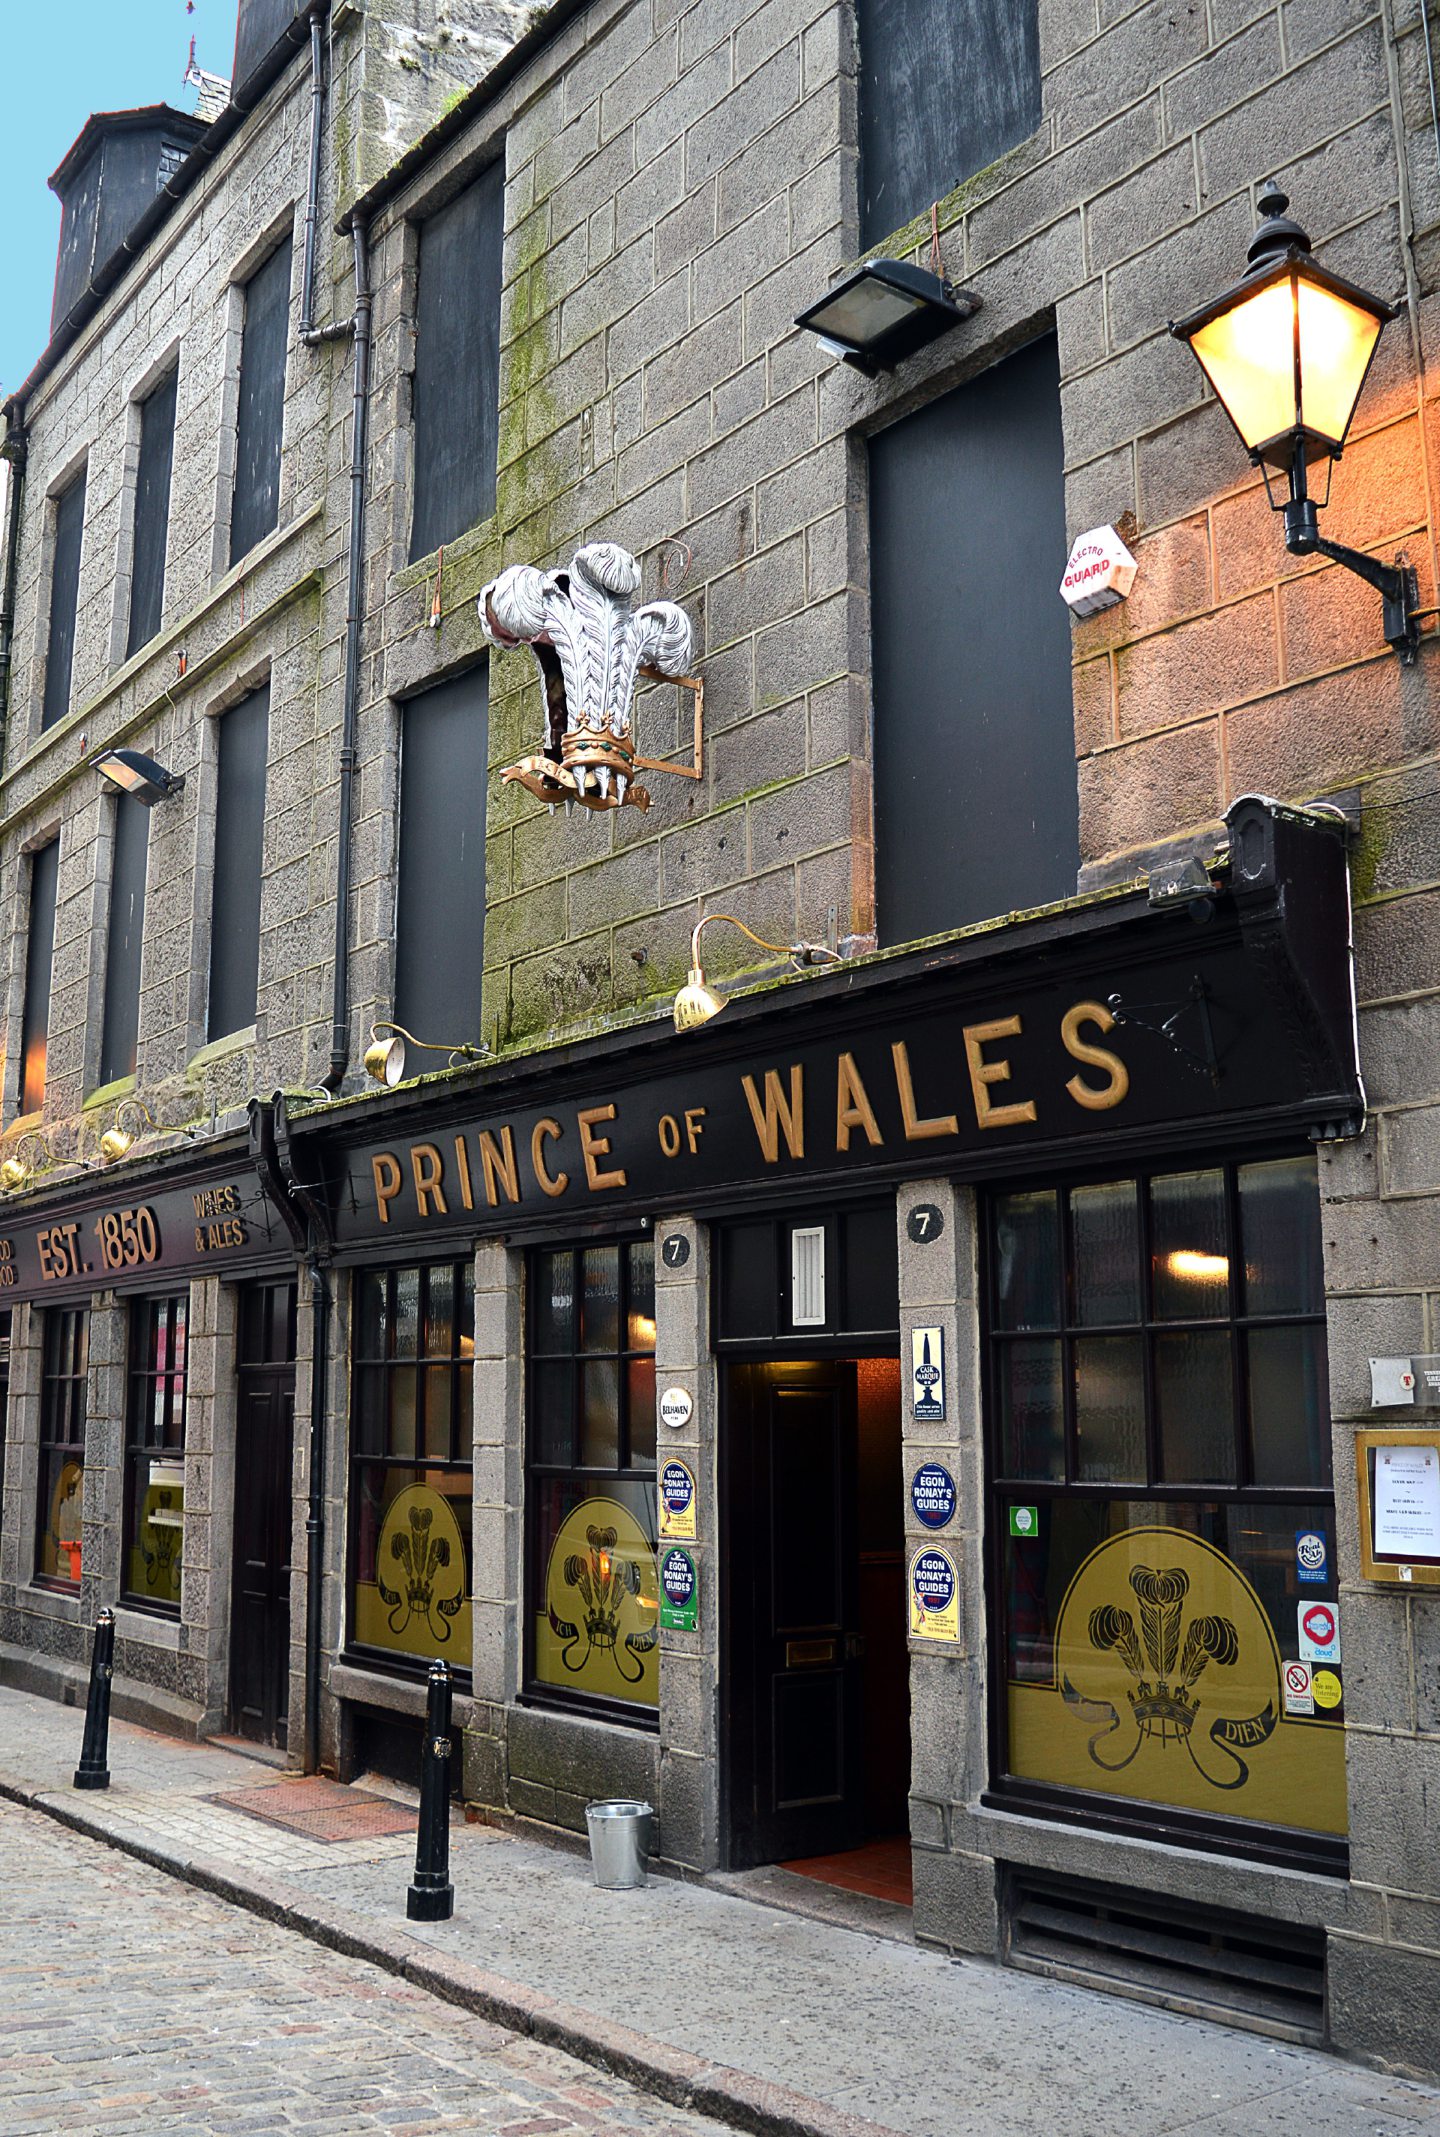 The outside of The Prince of Wales